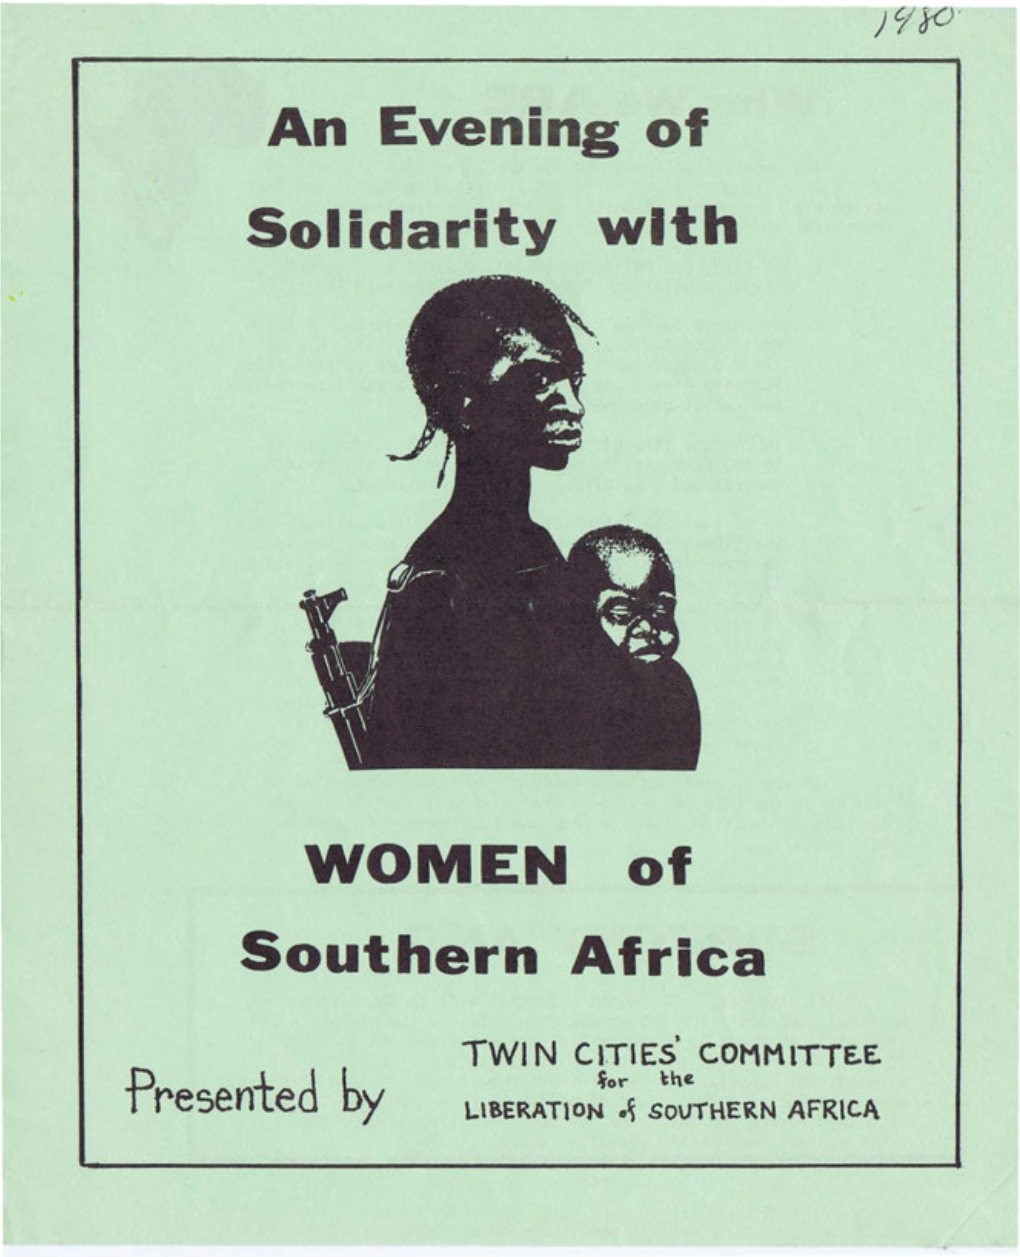 WOMEN of Southern Africa